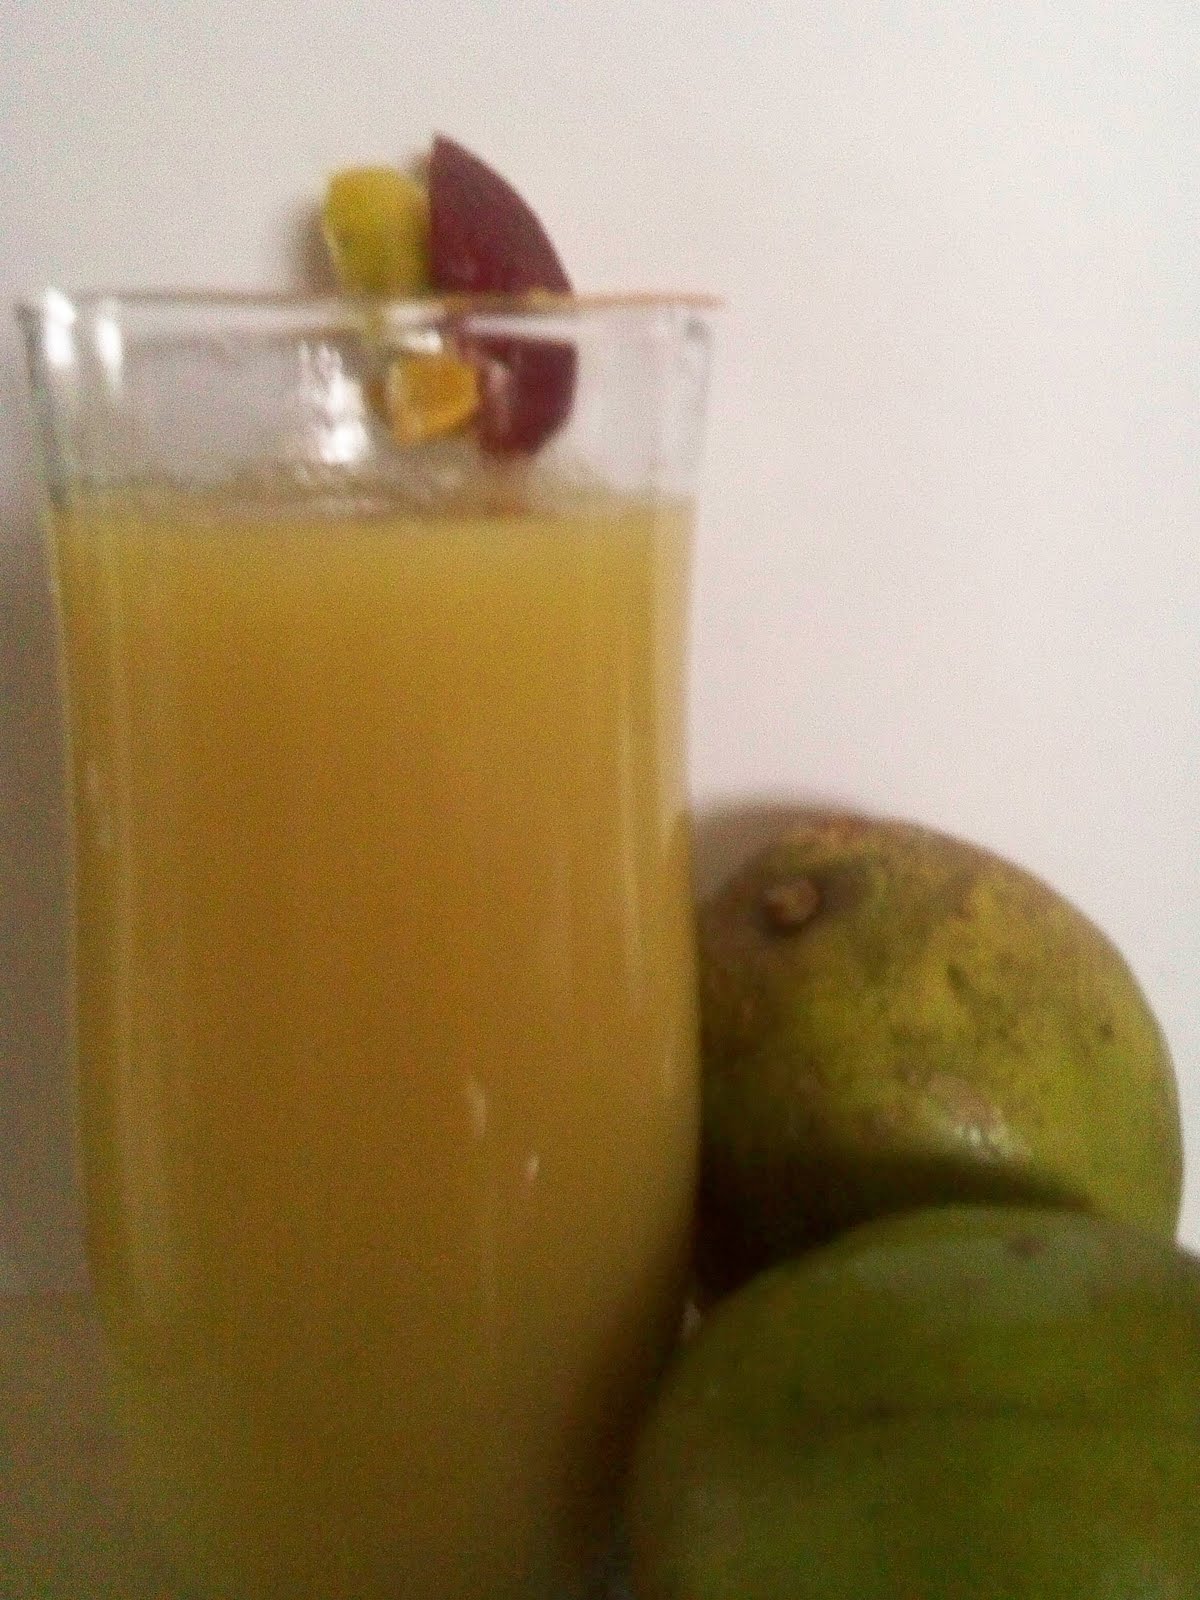 Food And Travel With Des Fresh Homemade Golden Apple Juice It S A Bajan Delight